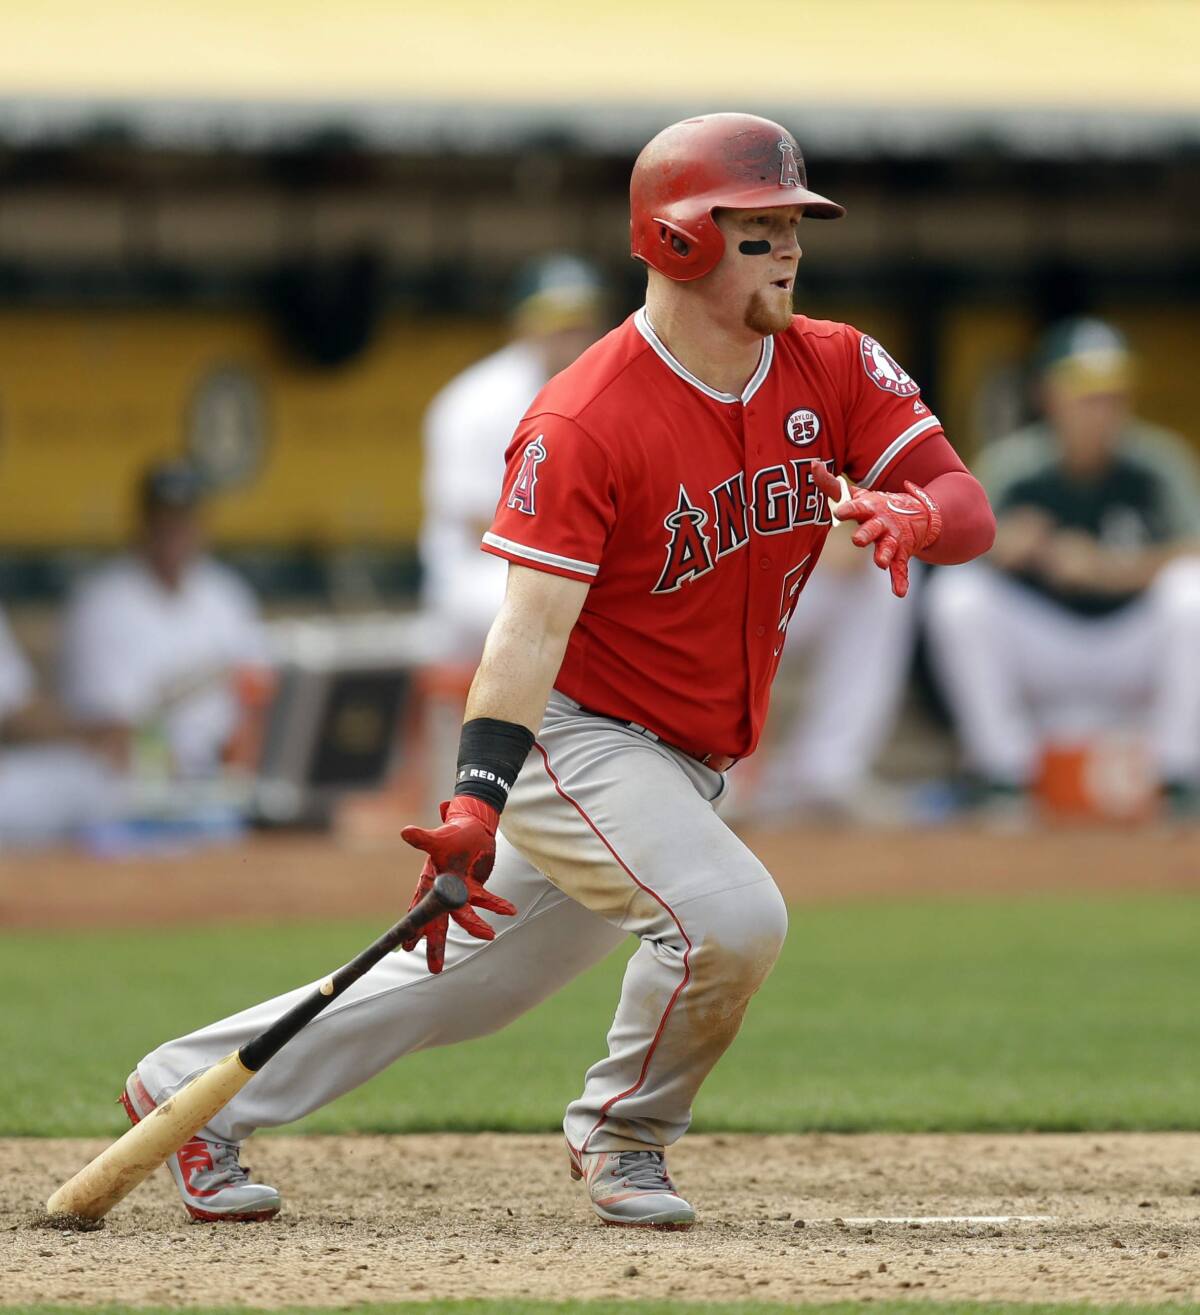 Kole Calhoun enters what could be the final week of his Angels